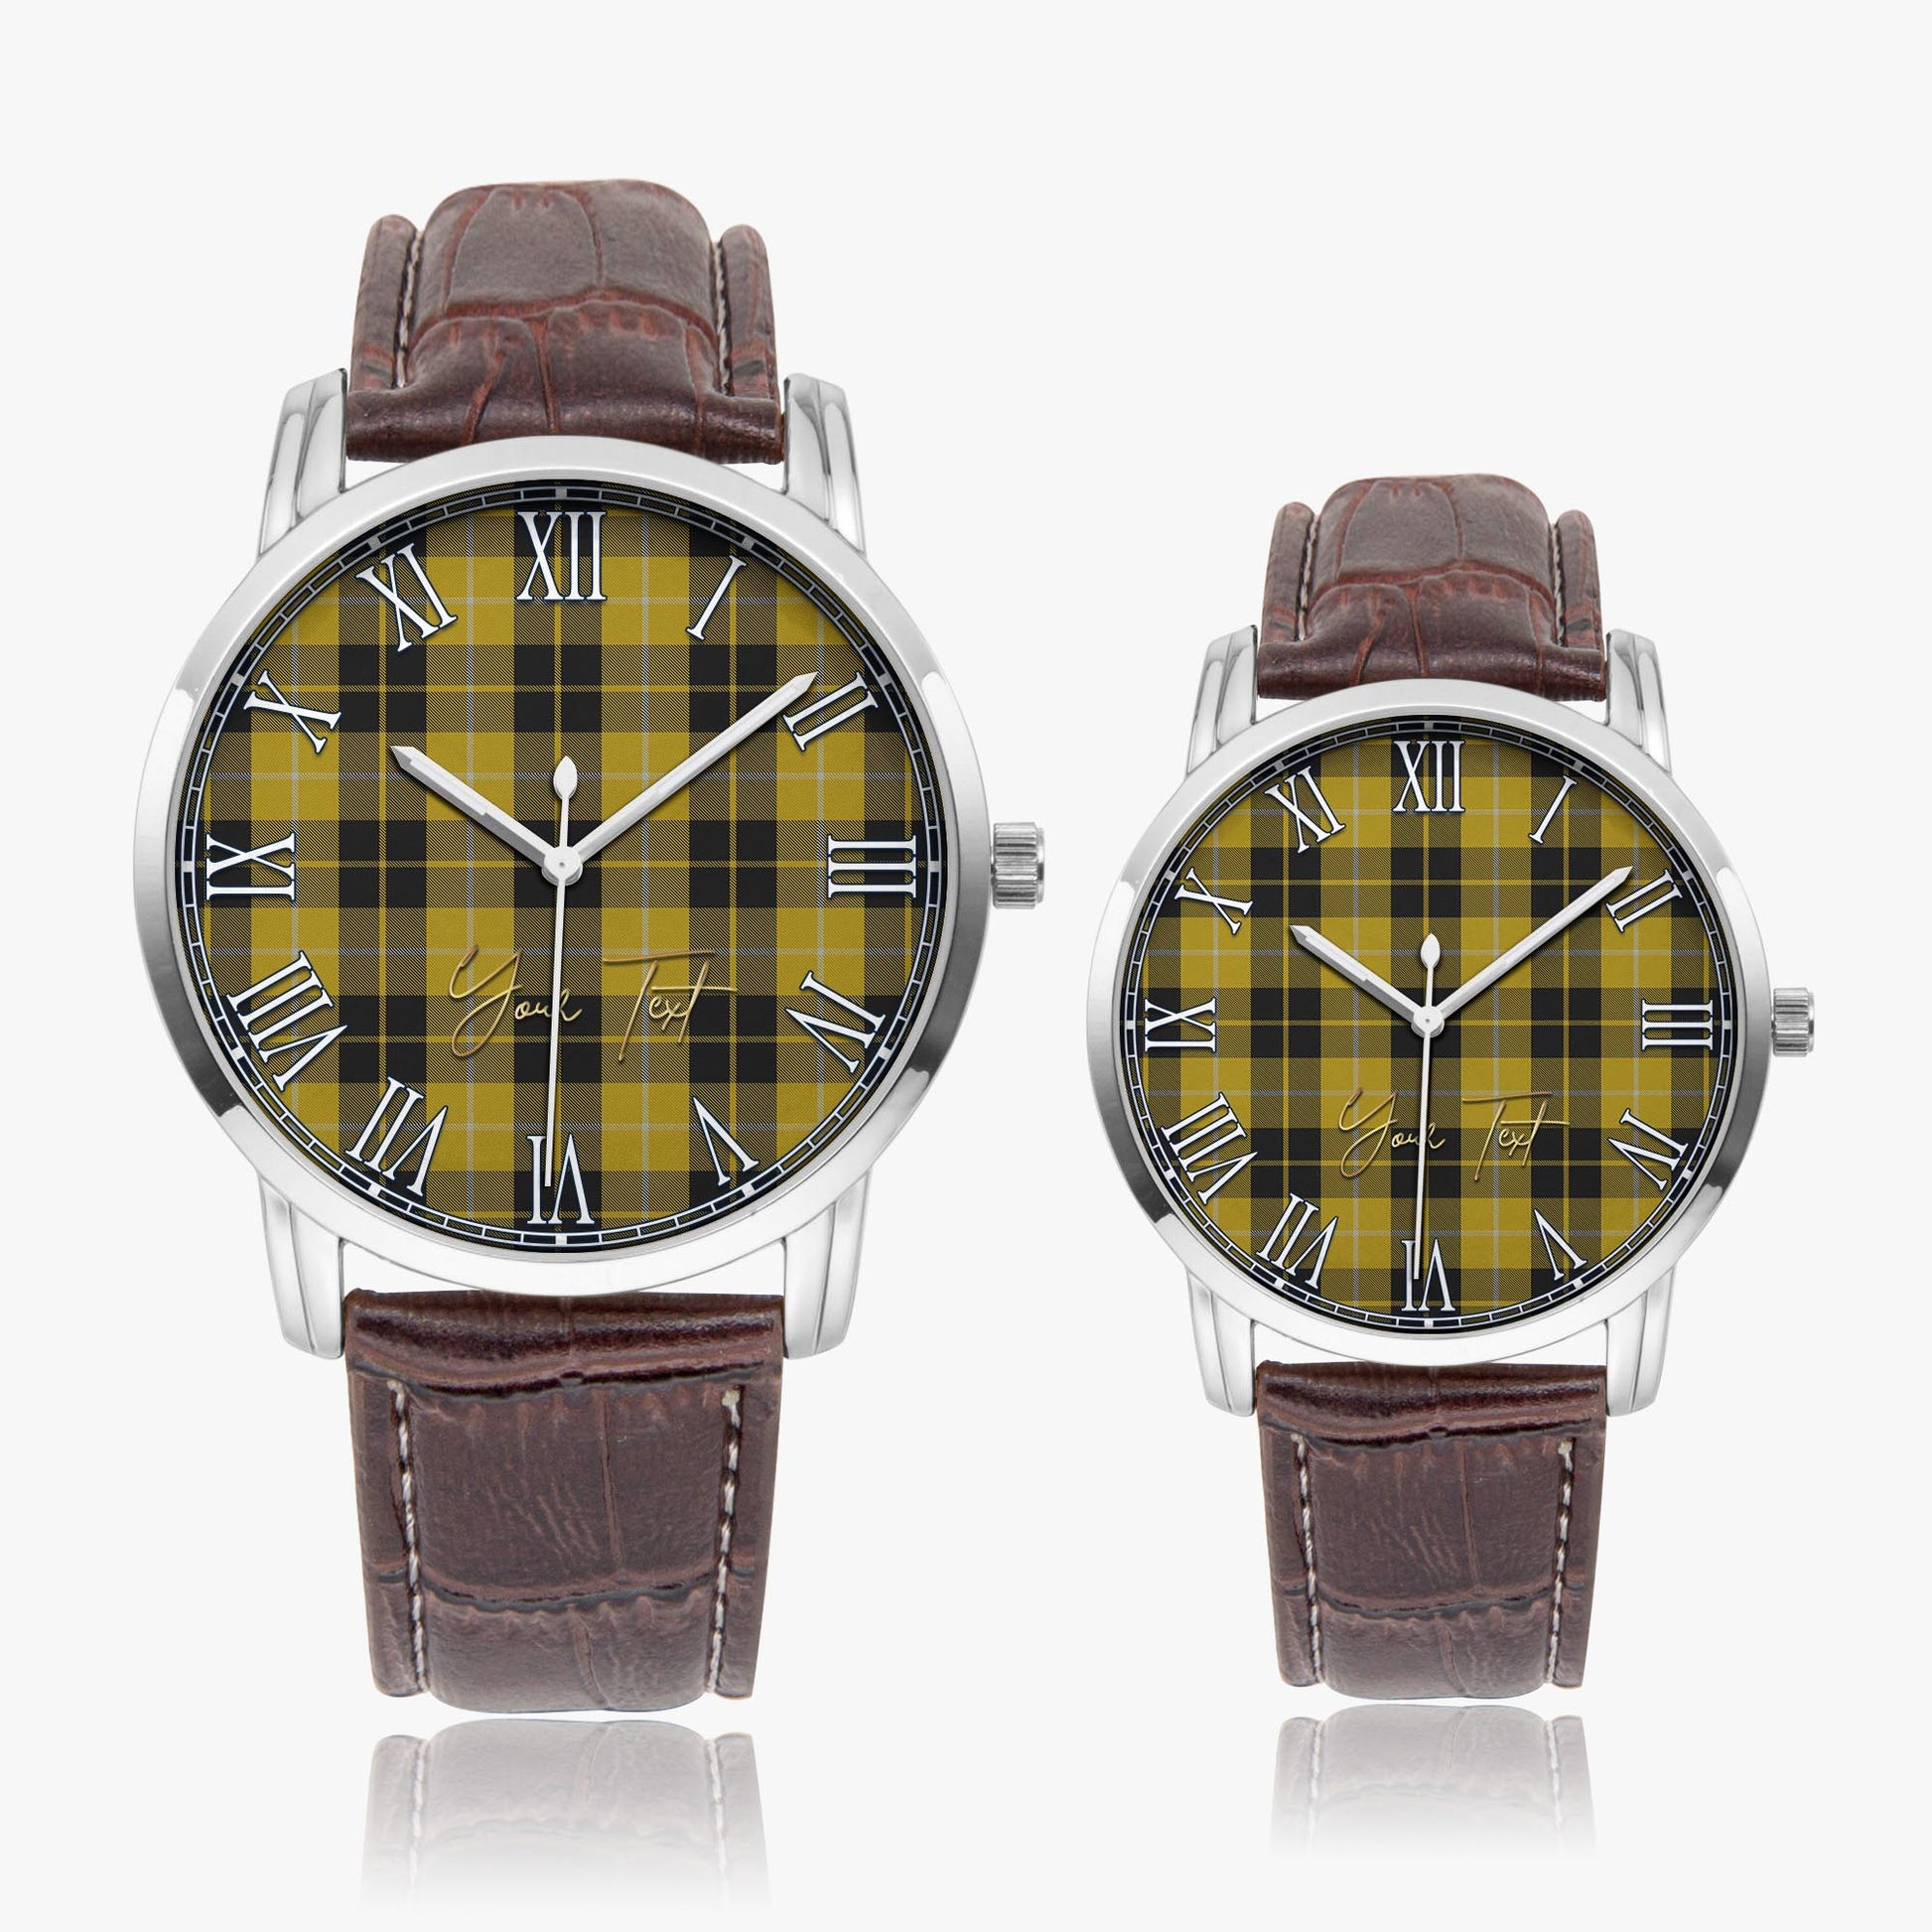 Barclay Dress Tartan Personalized Your Text Leather Trap Quartz Watch Wide Type Silver Case With Brown Leather Strap - Tartanvibesclothing